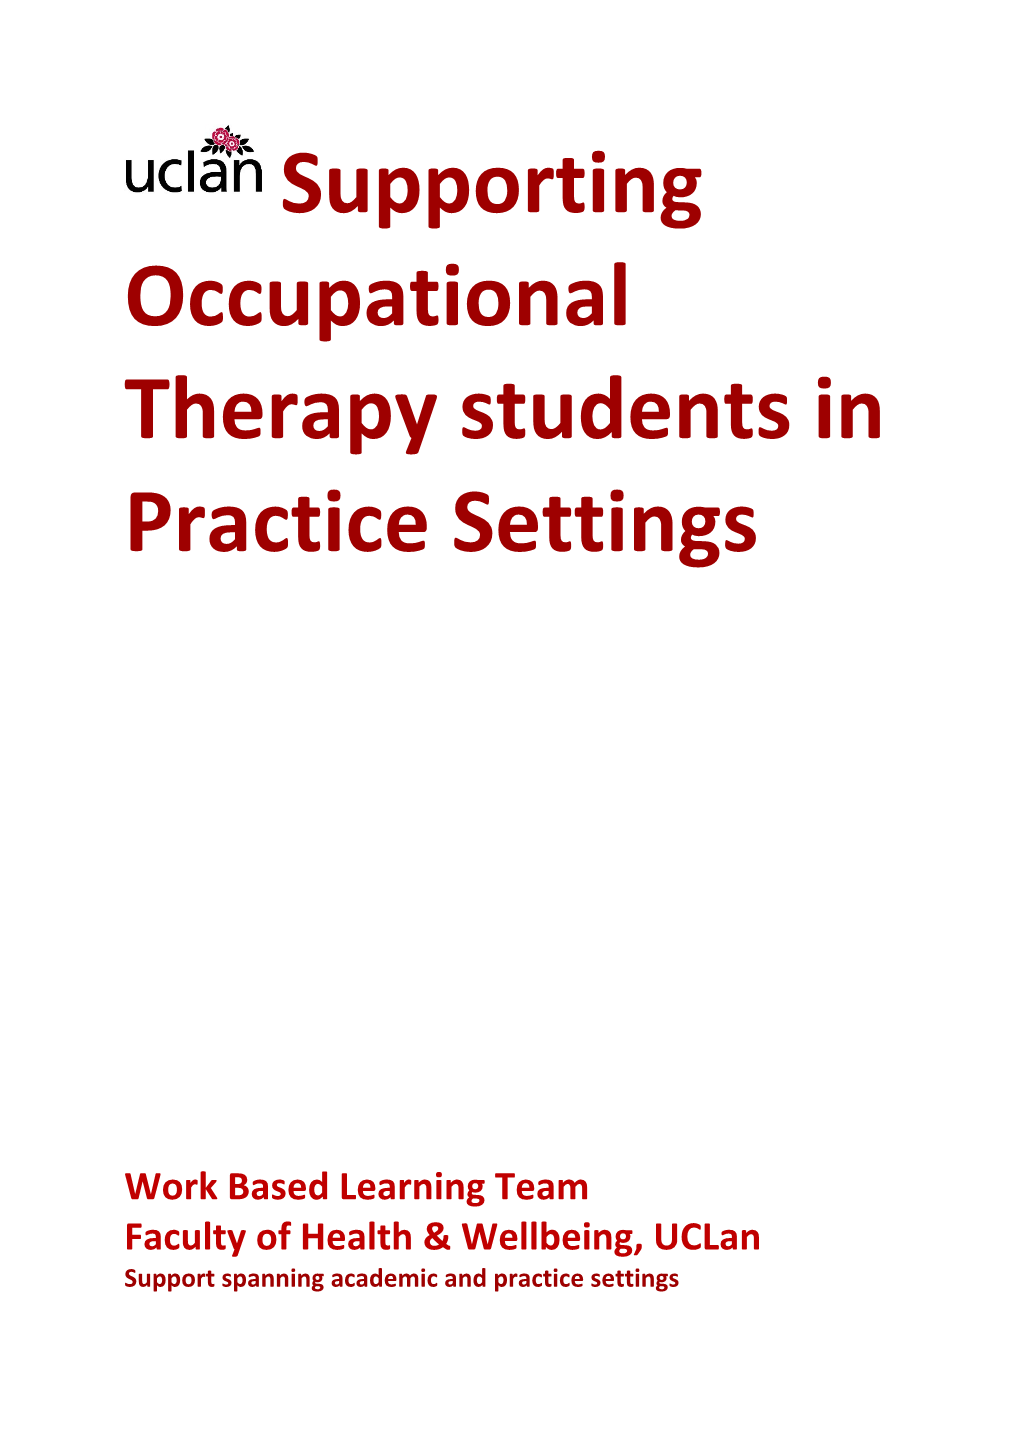 Supporting Occupational Therapy Students in Practice Settings